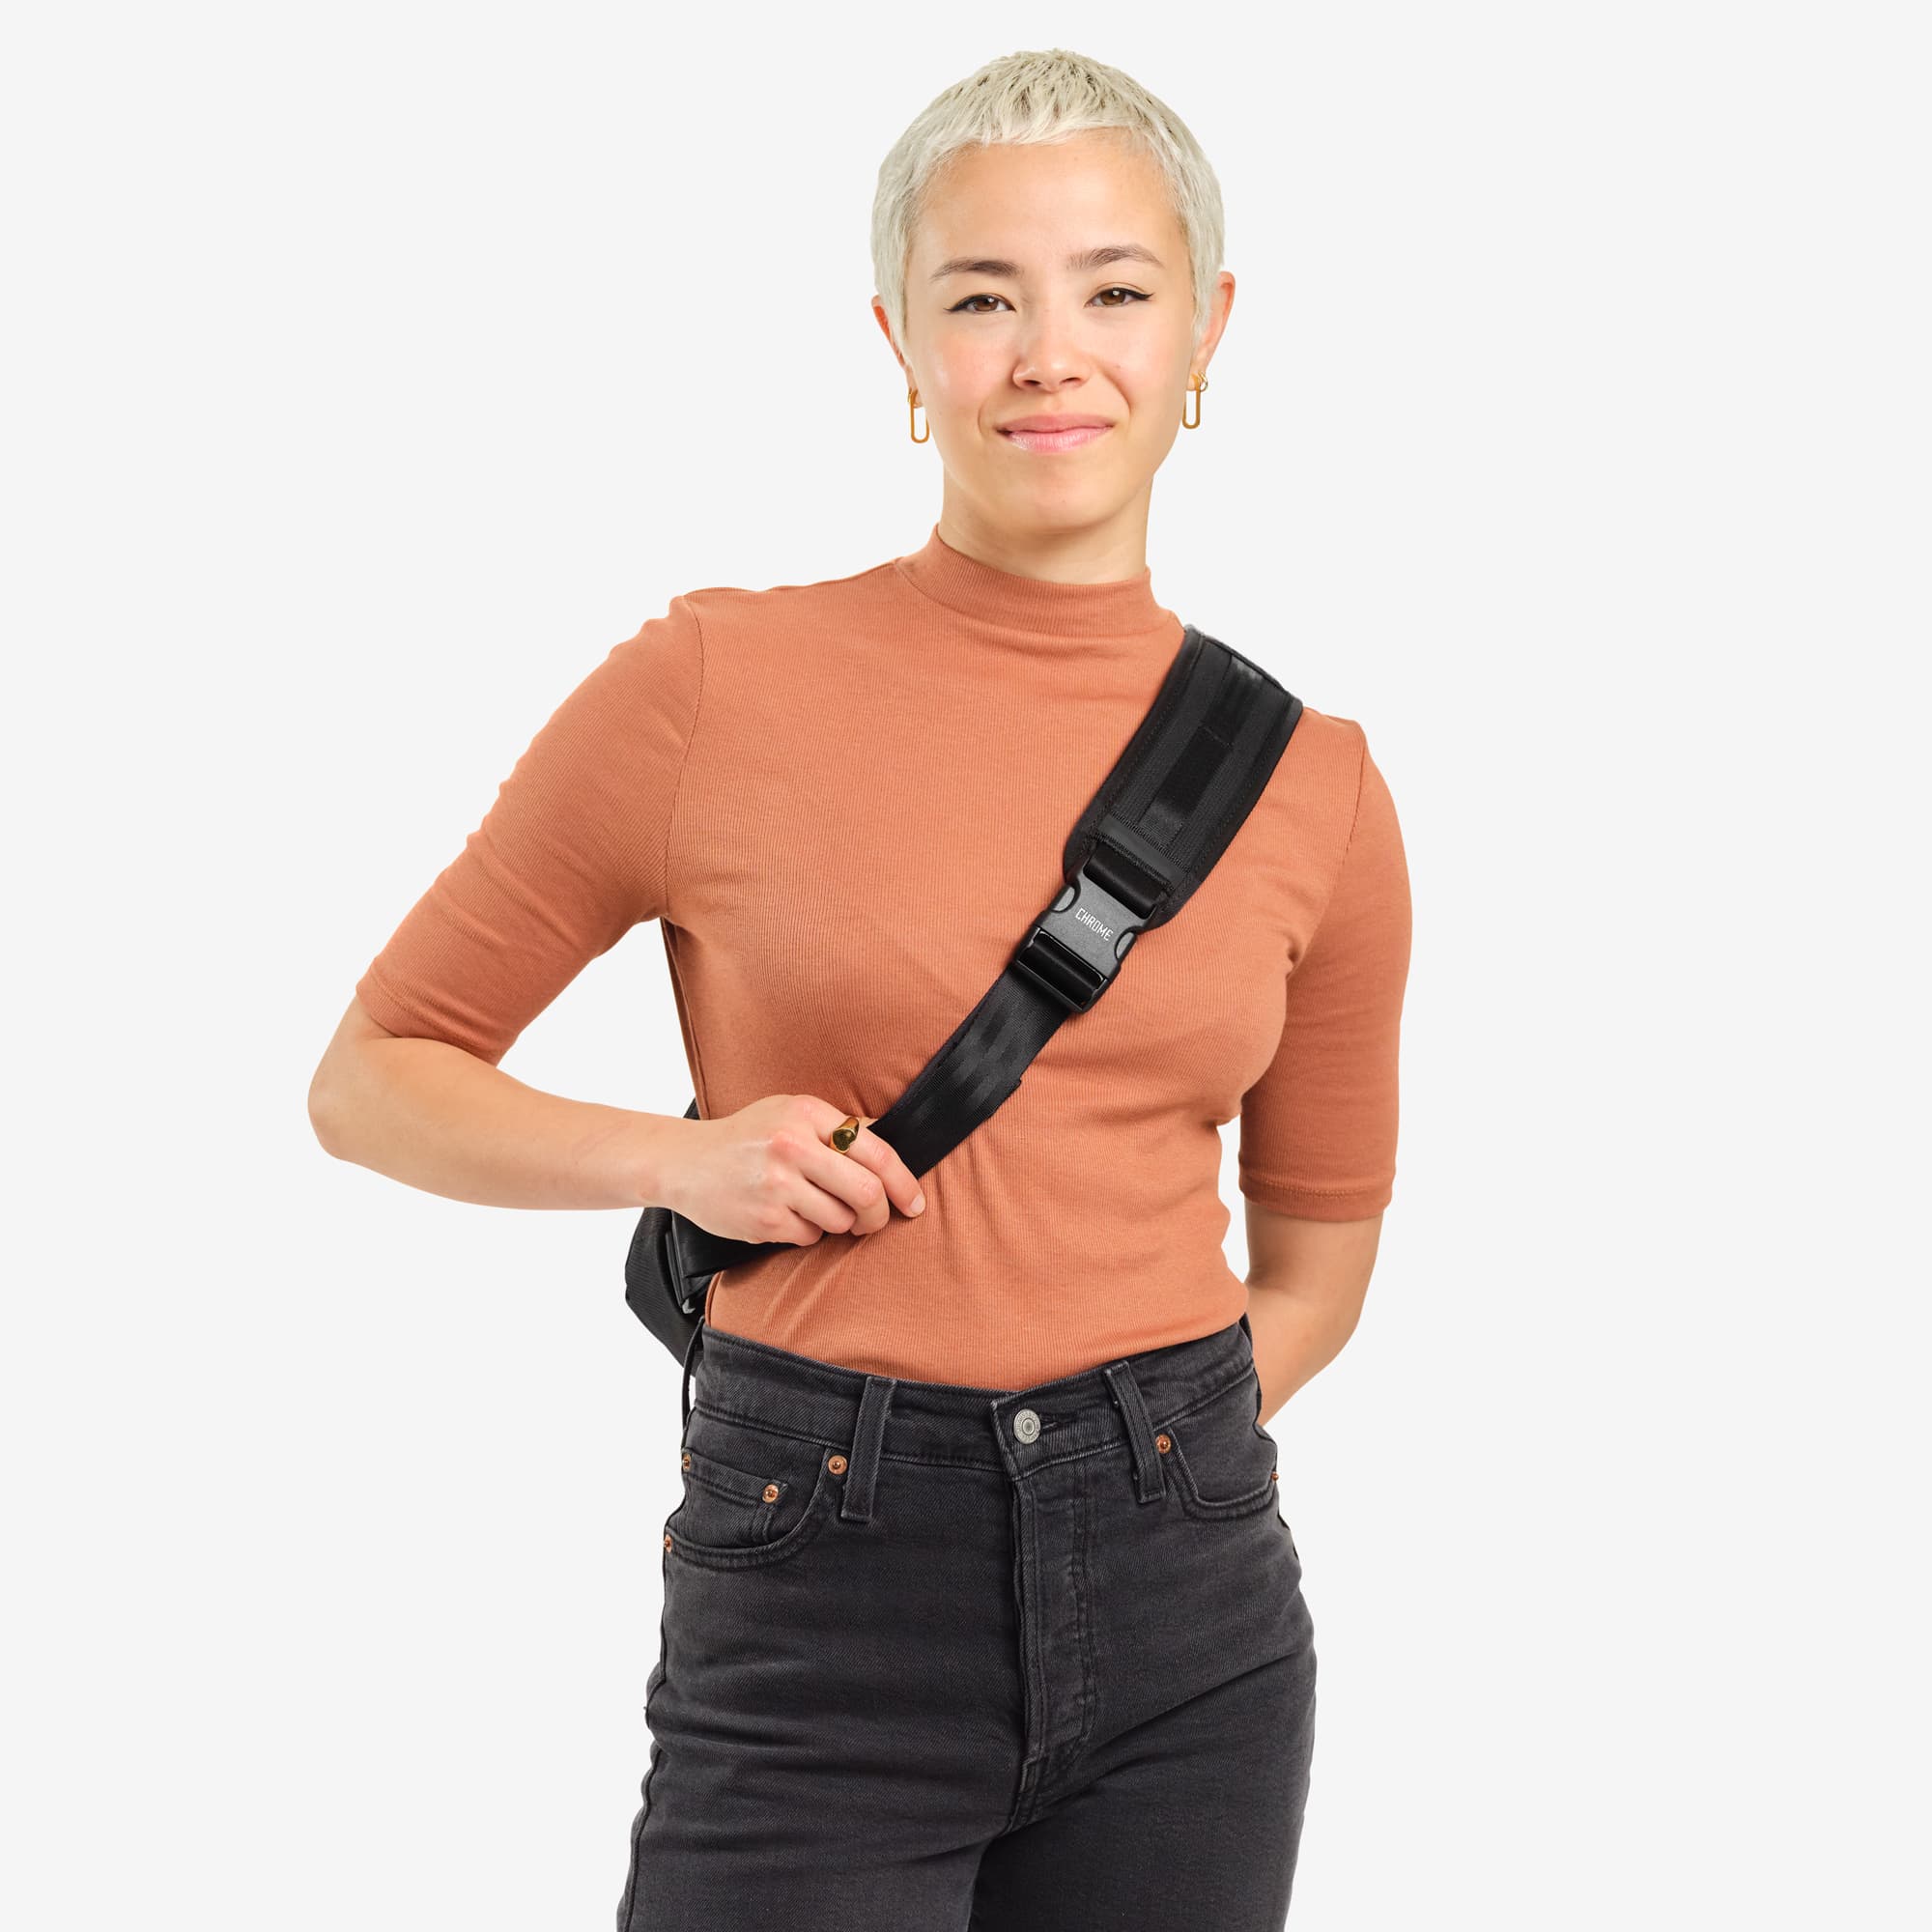 Ruckas Sling in black worn by a woman front view